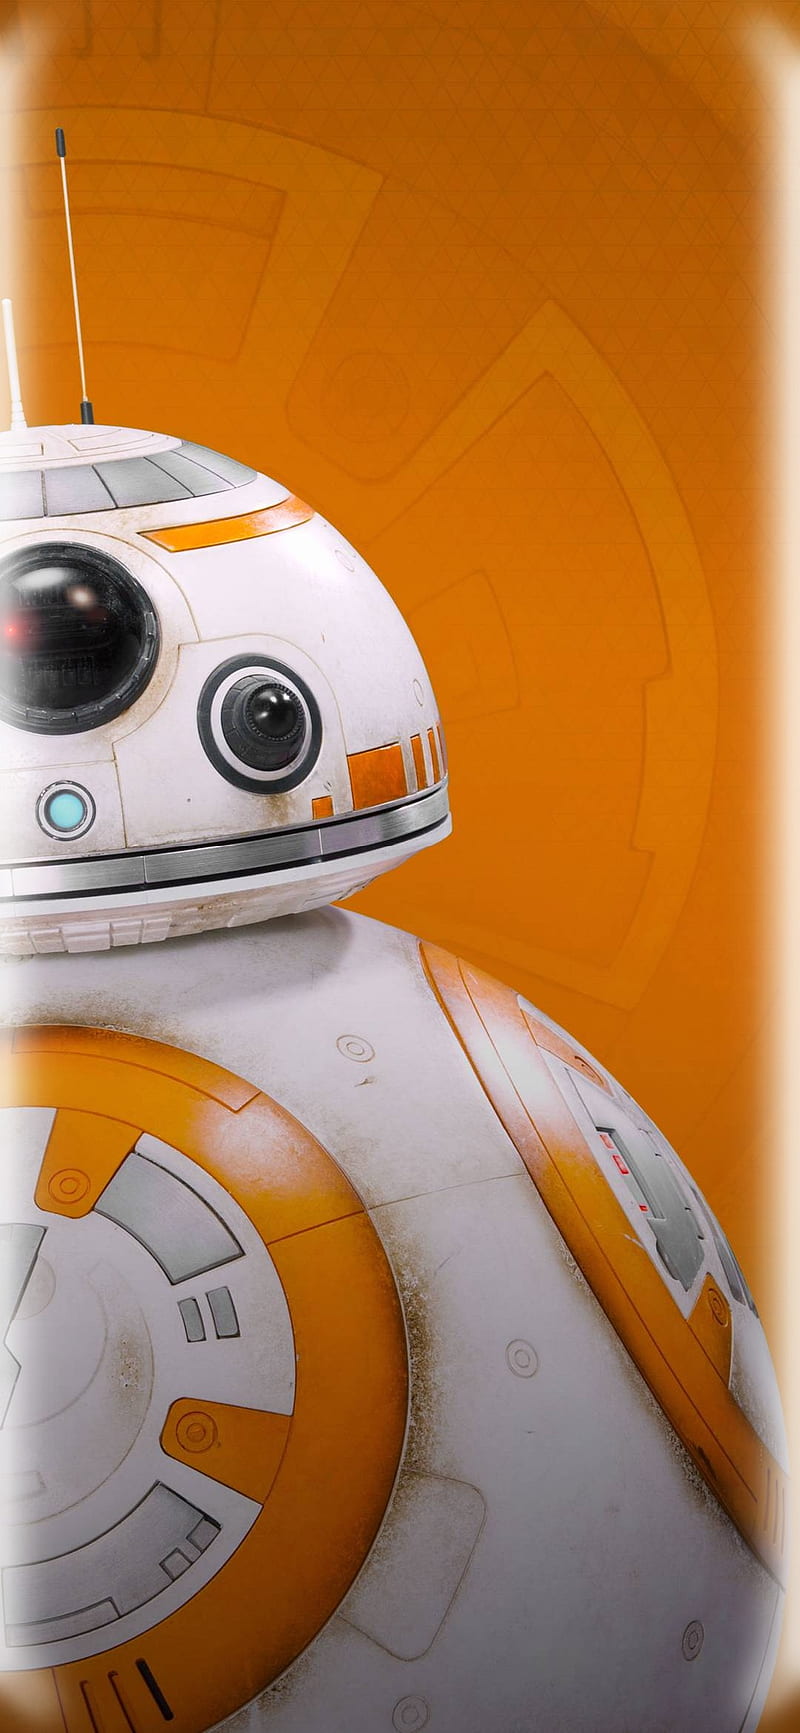 BB8 wallpaper by Colt91  Download on ZEDGE  46c7